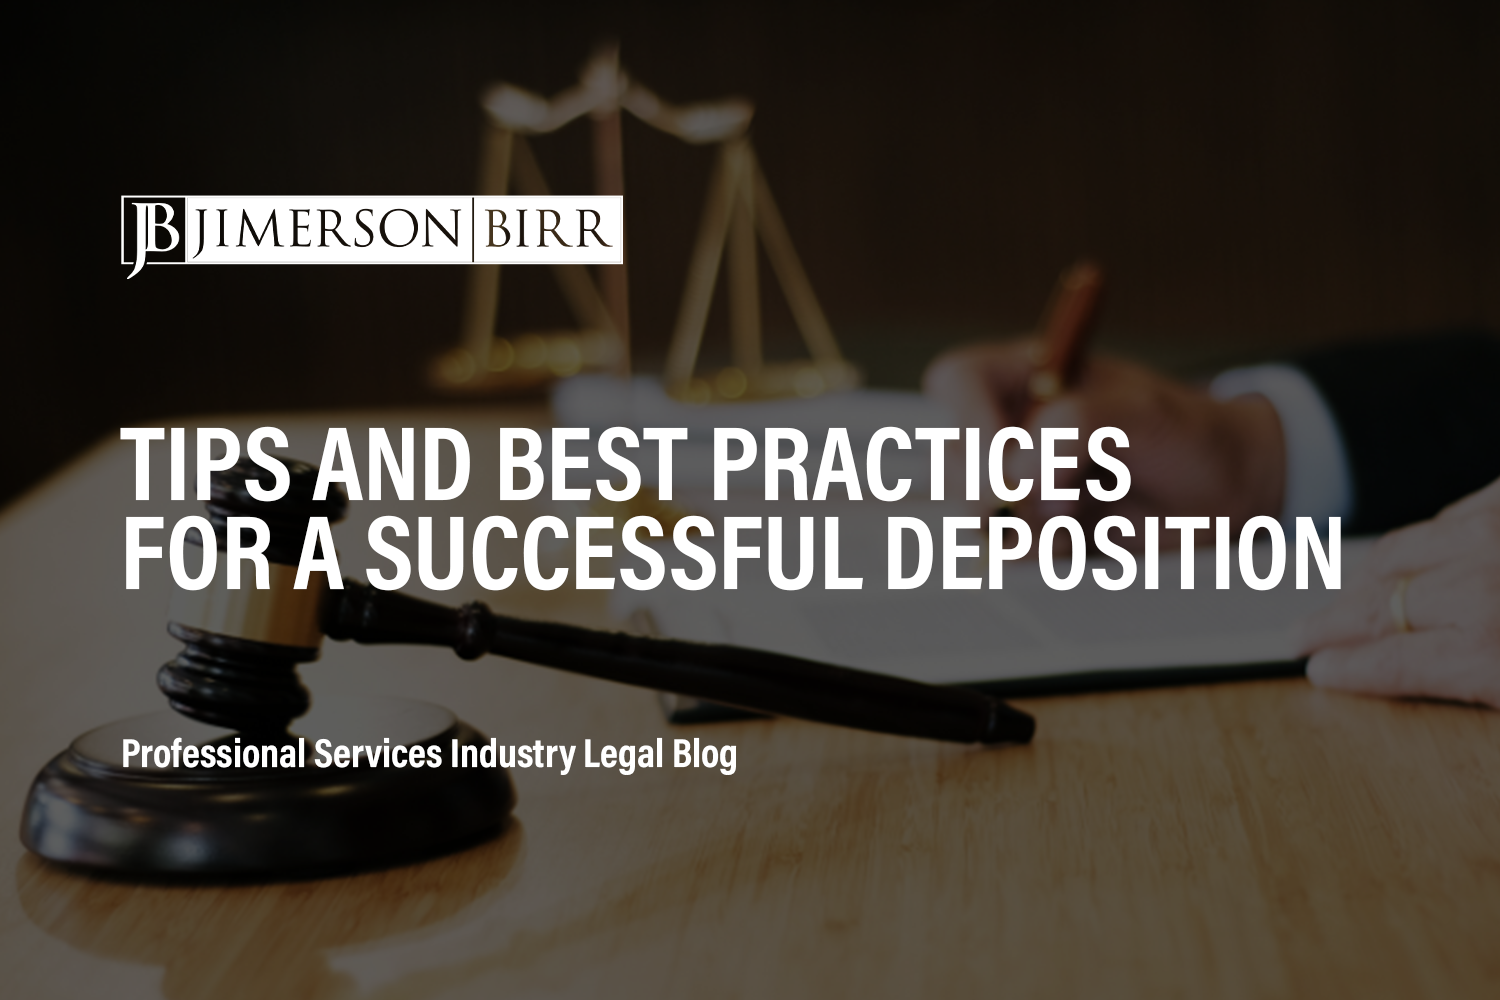 Tips and Best Practices for a Successful Deposition